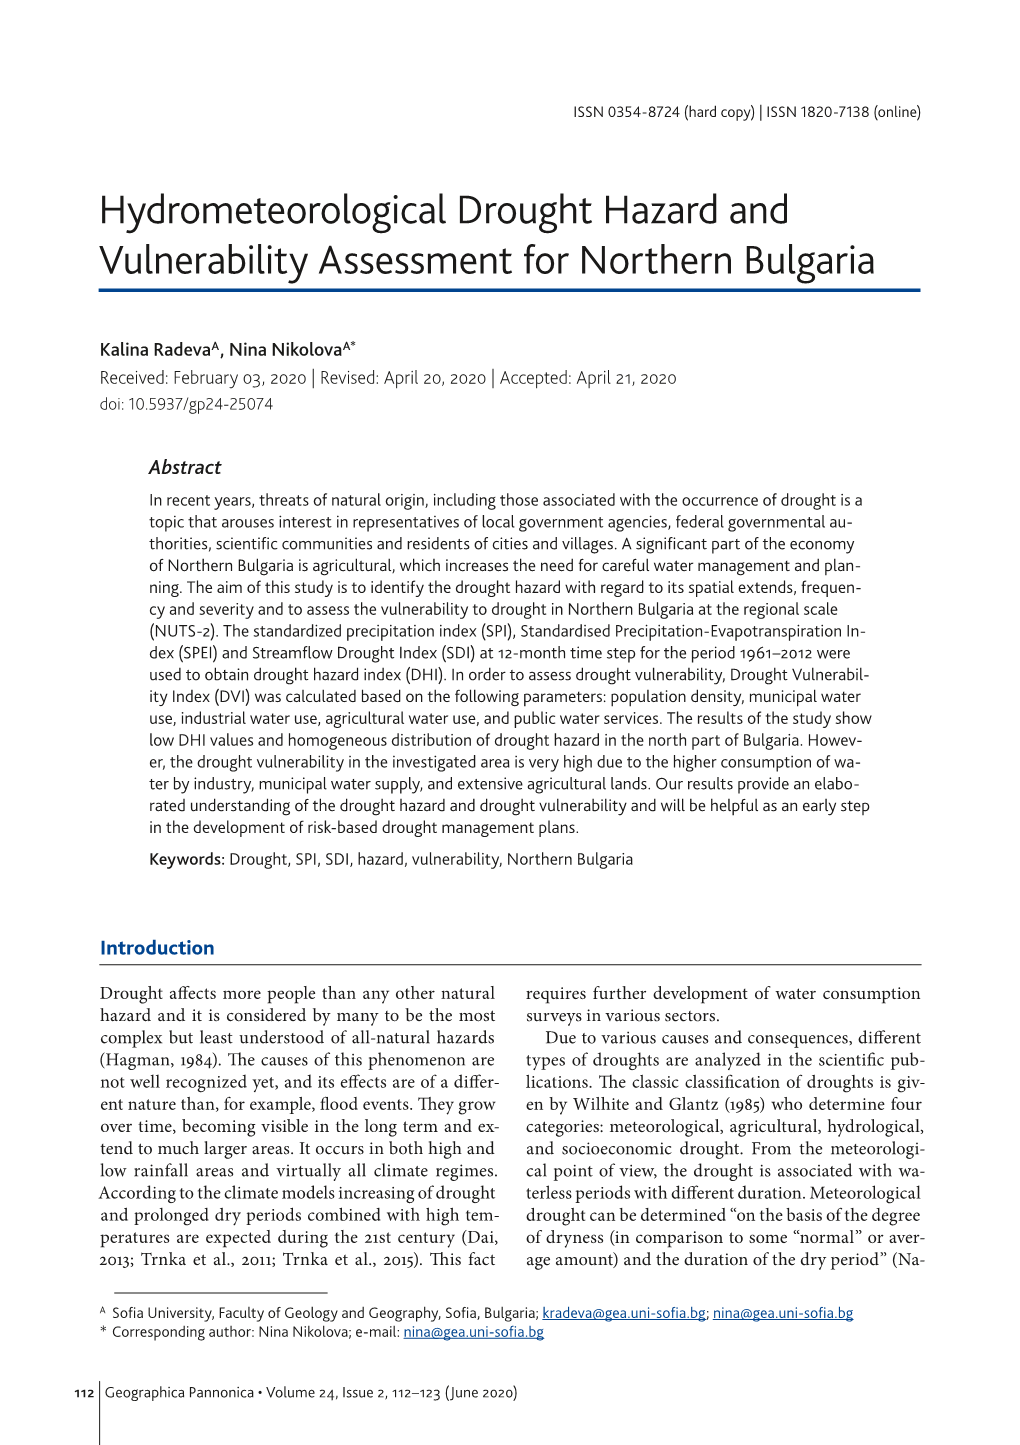 Hydrometeorological Drought Hazard and Vulnerability Assessment for Northern Bulgaria